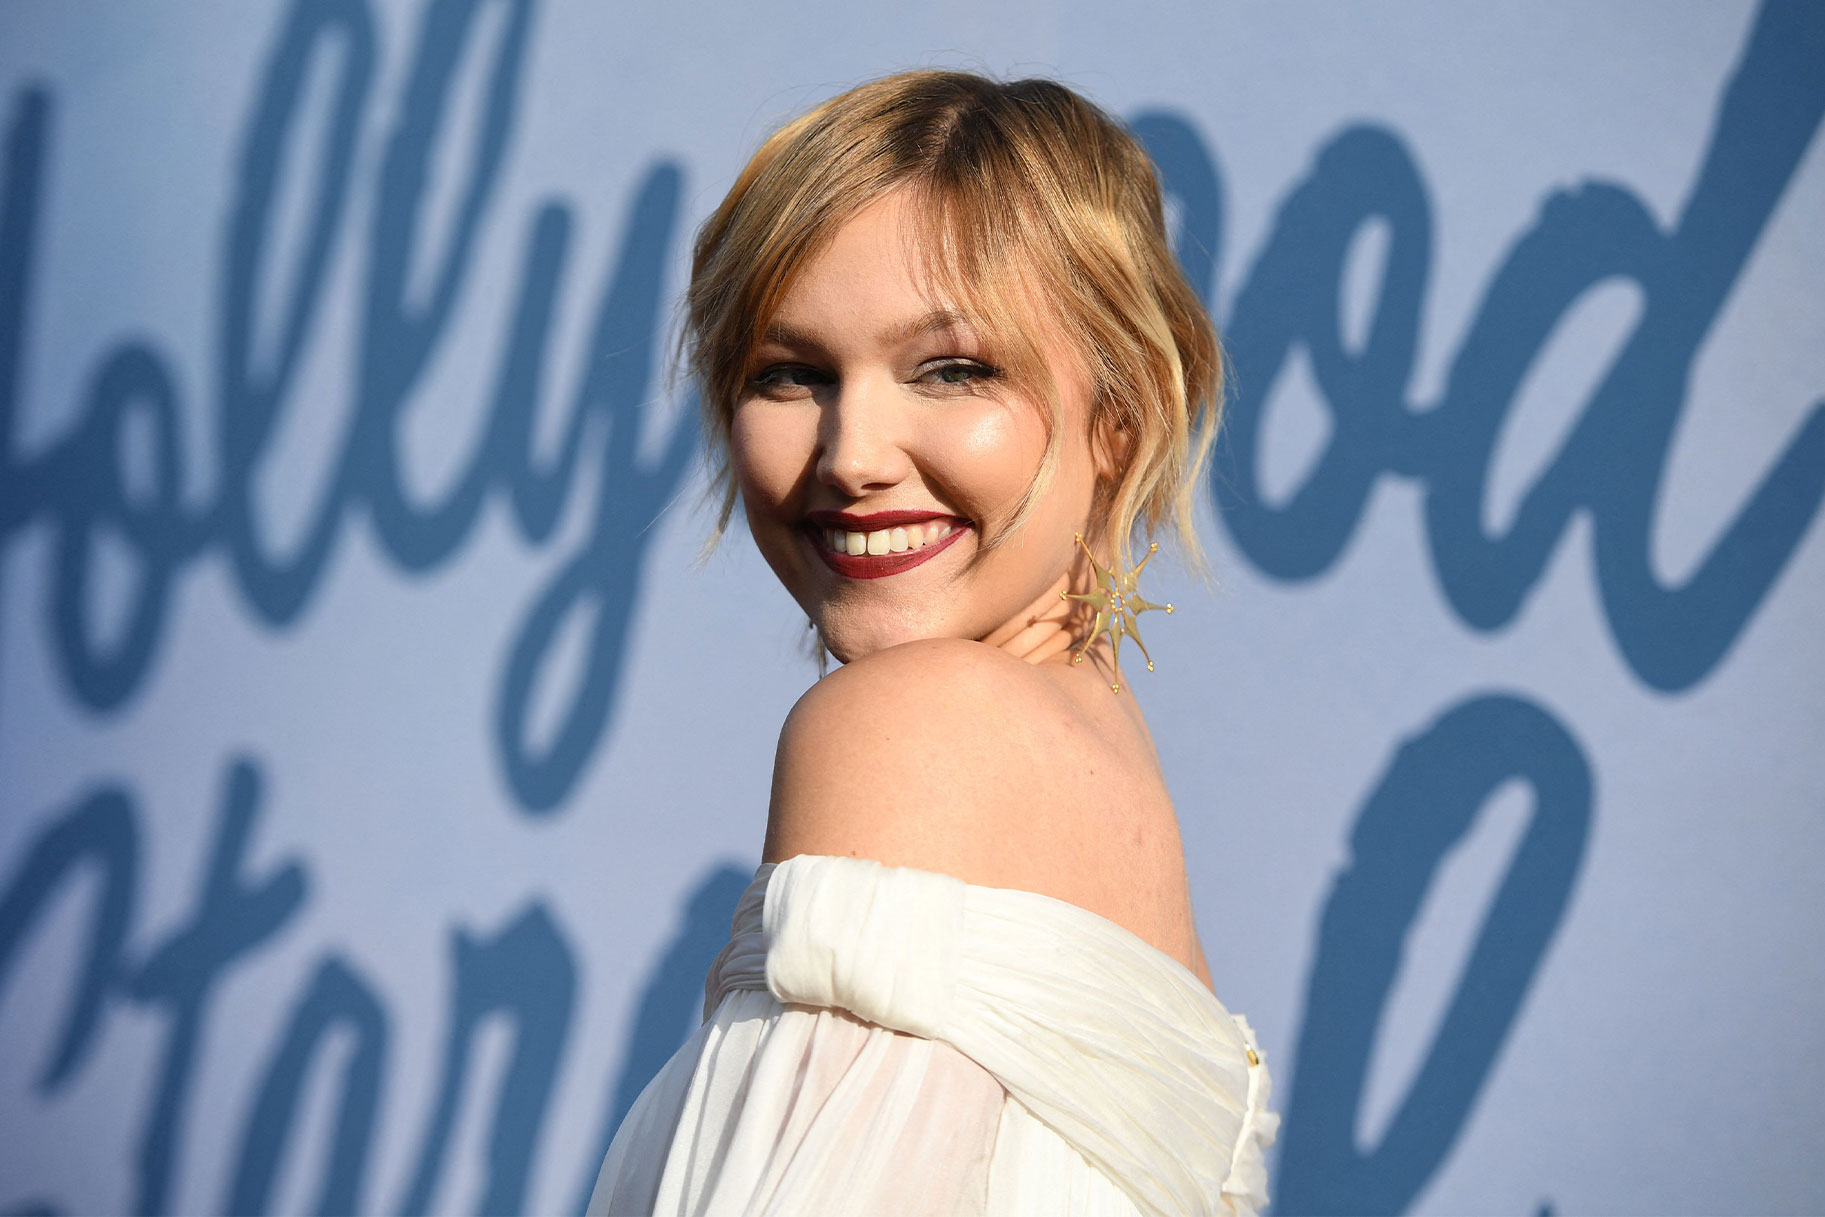 Grace Vanderwaal smiling at the camera on a red carpet